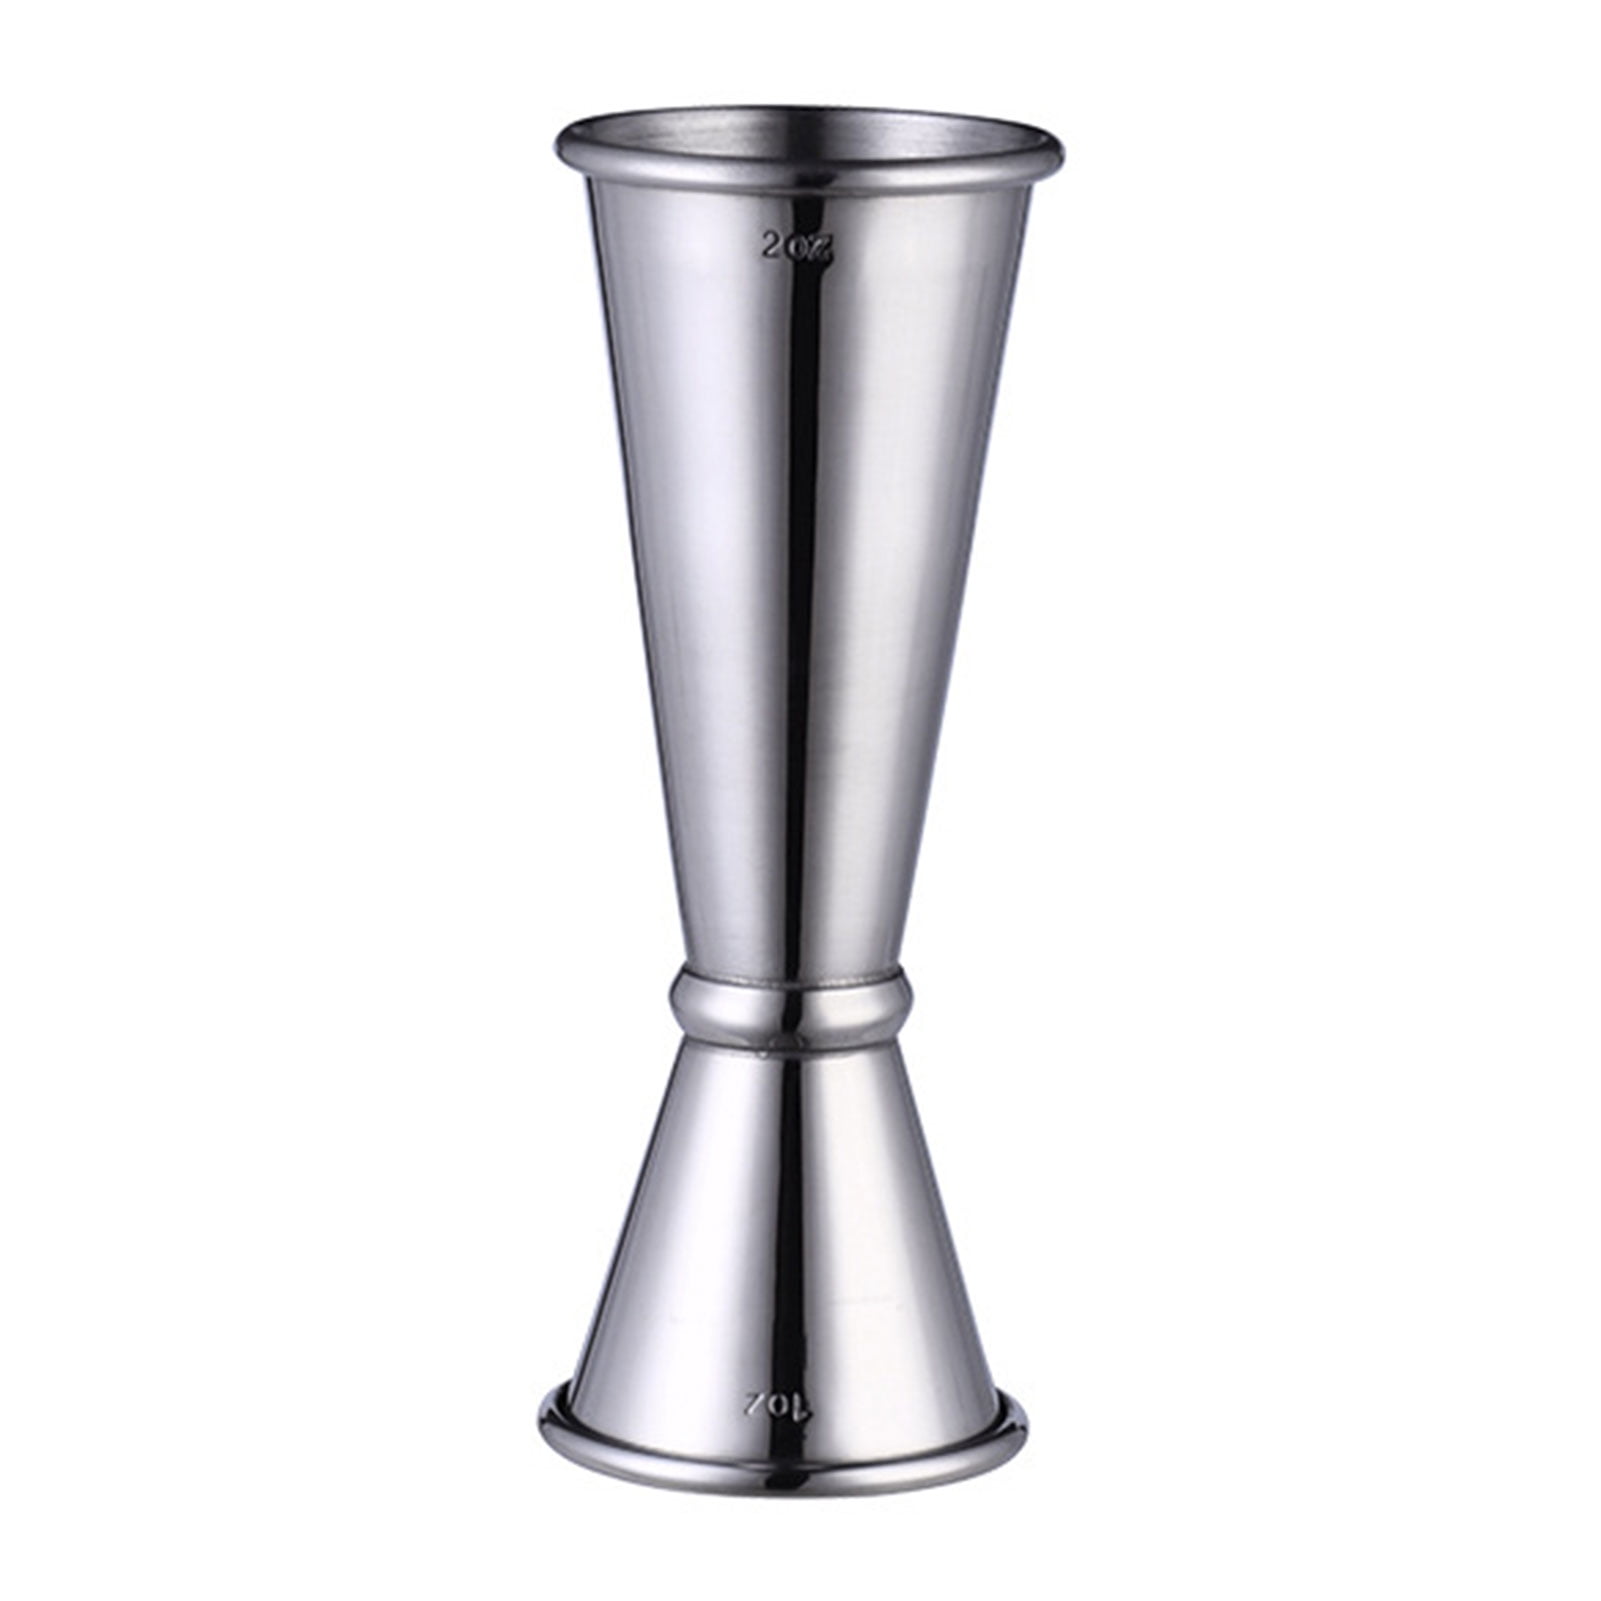 AU Luxe Stainless Steel 18/8 Cocktail Measuring Jigger Cup, 28ml And 14ml